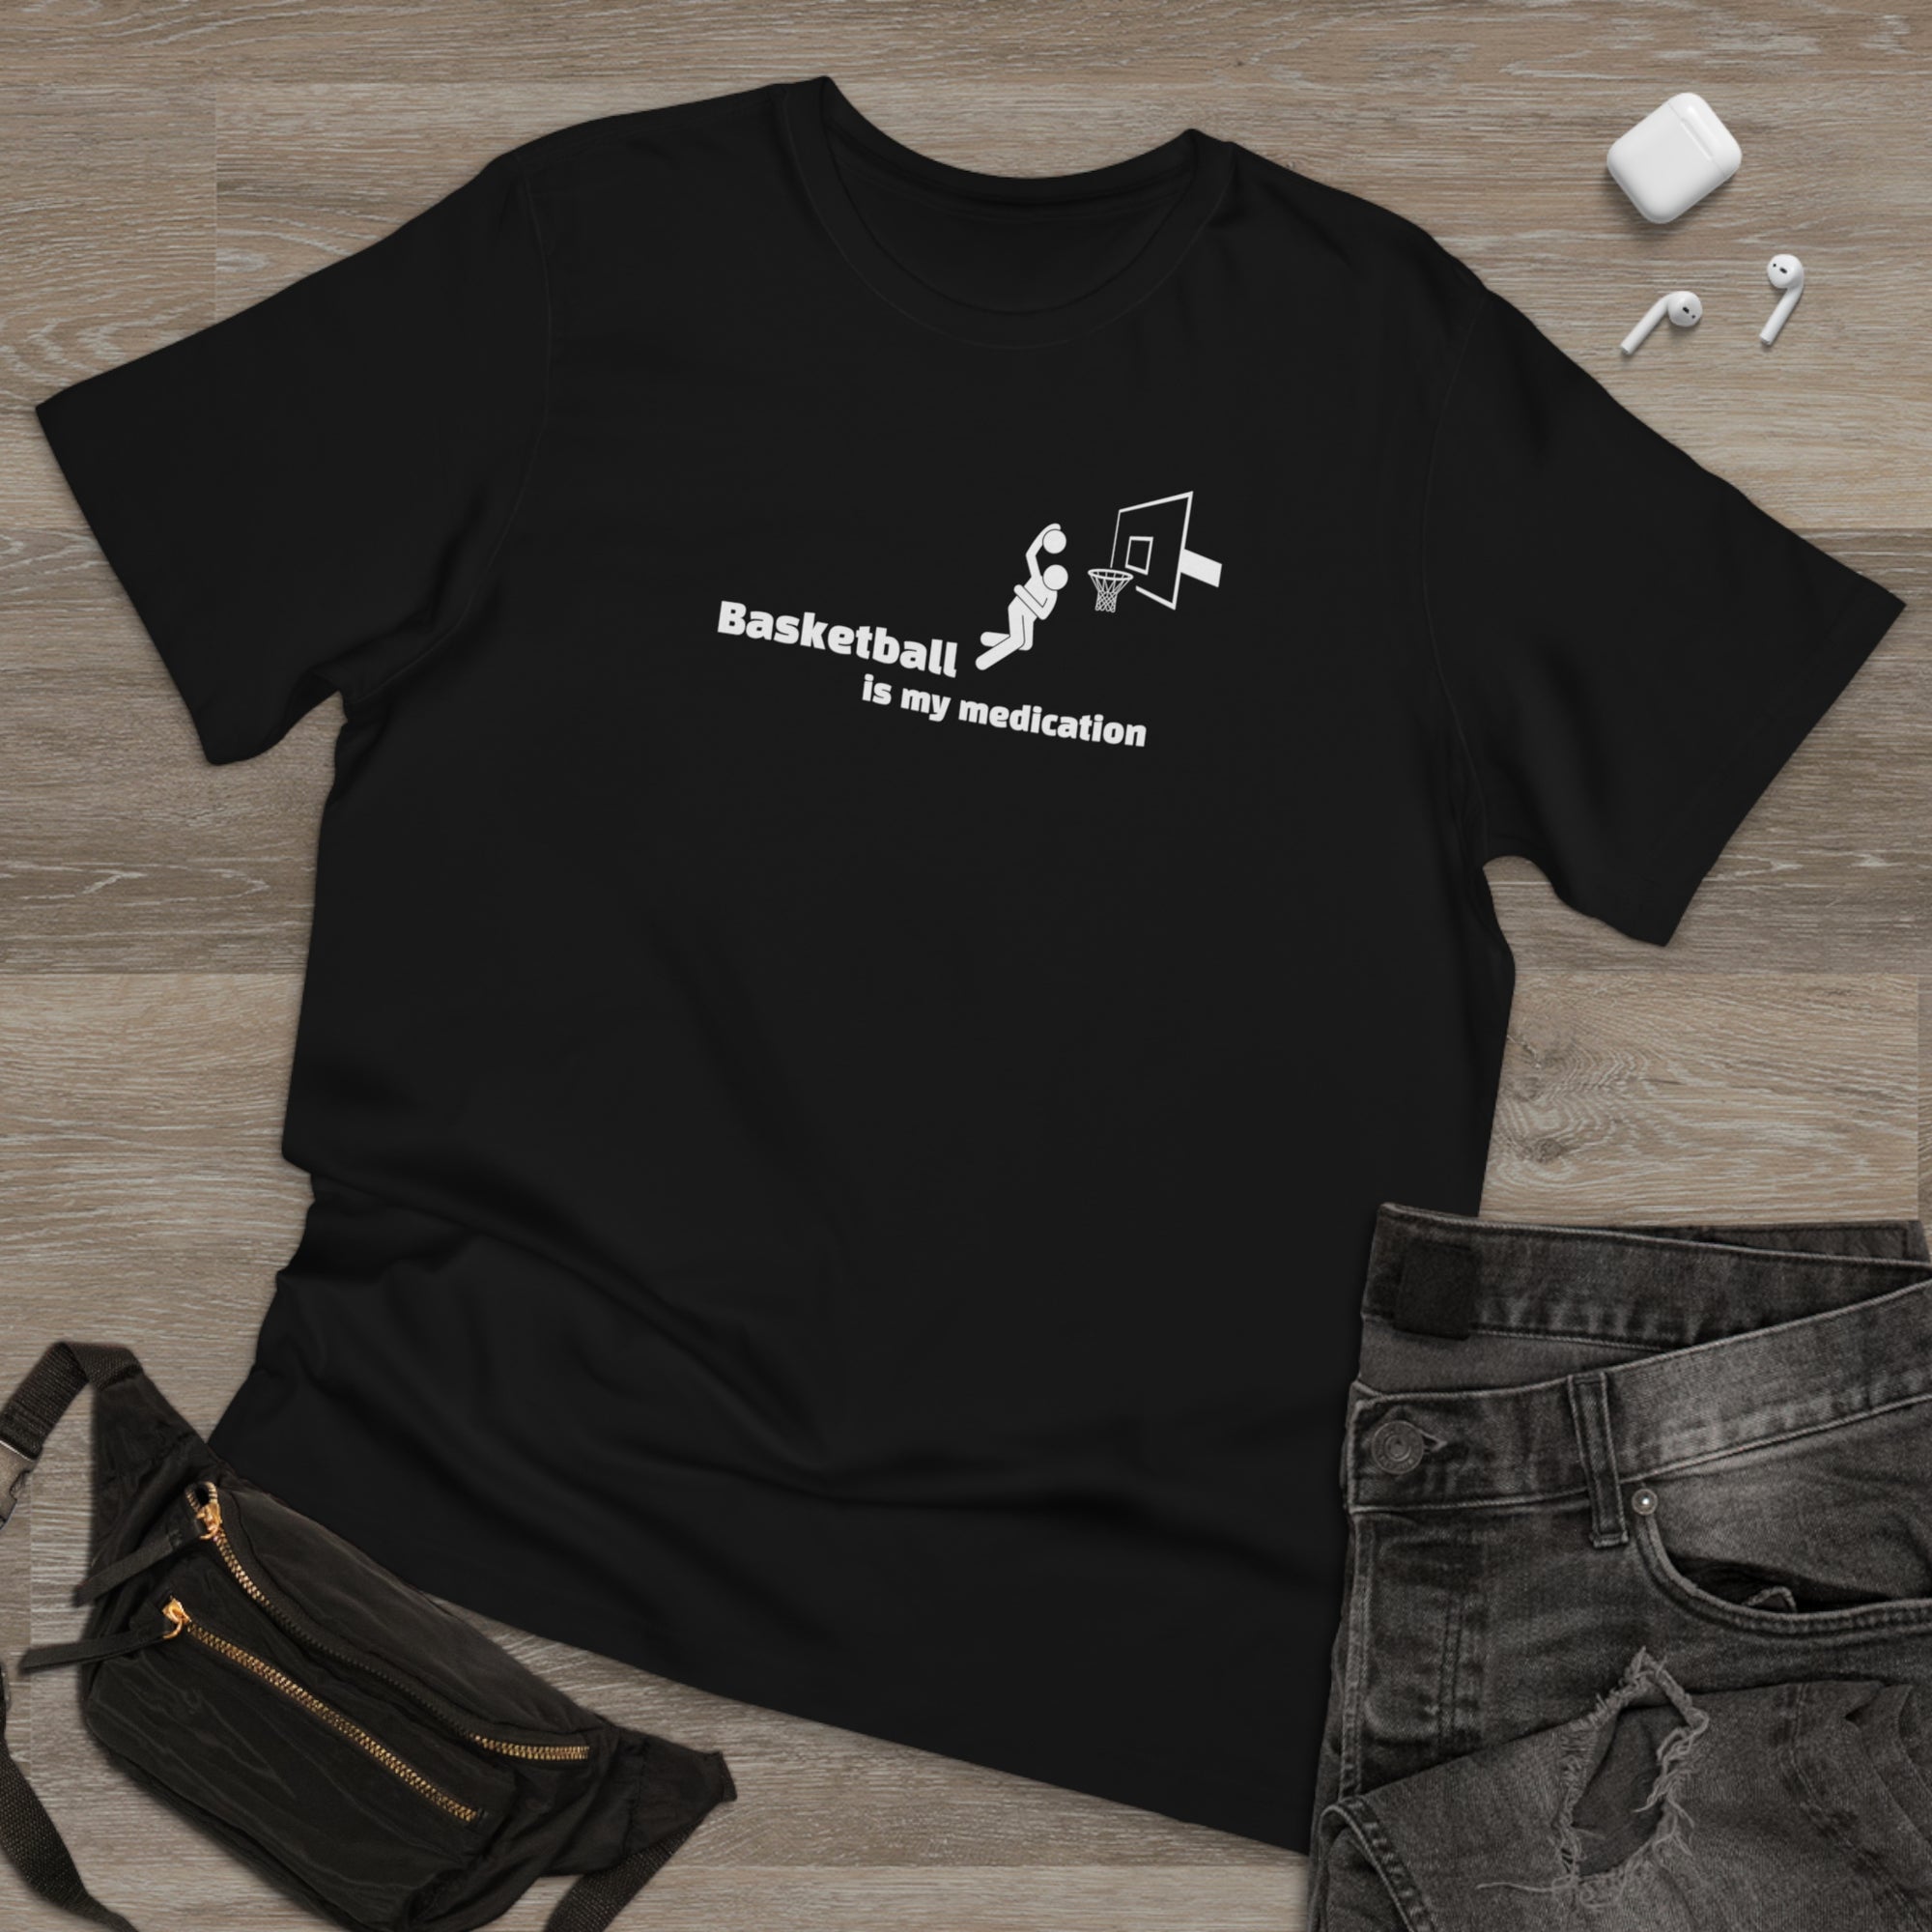 “Basketball is my Medication” Unisex Deluxe T-shirt